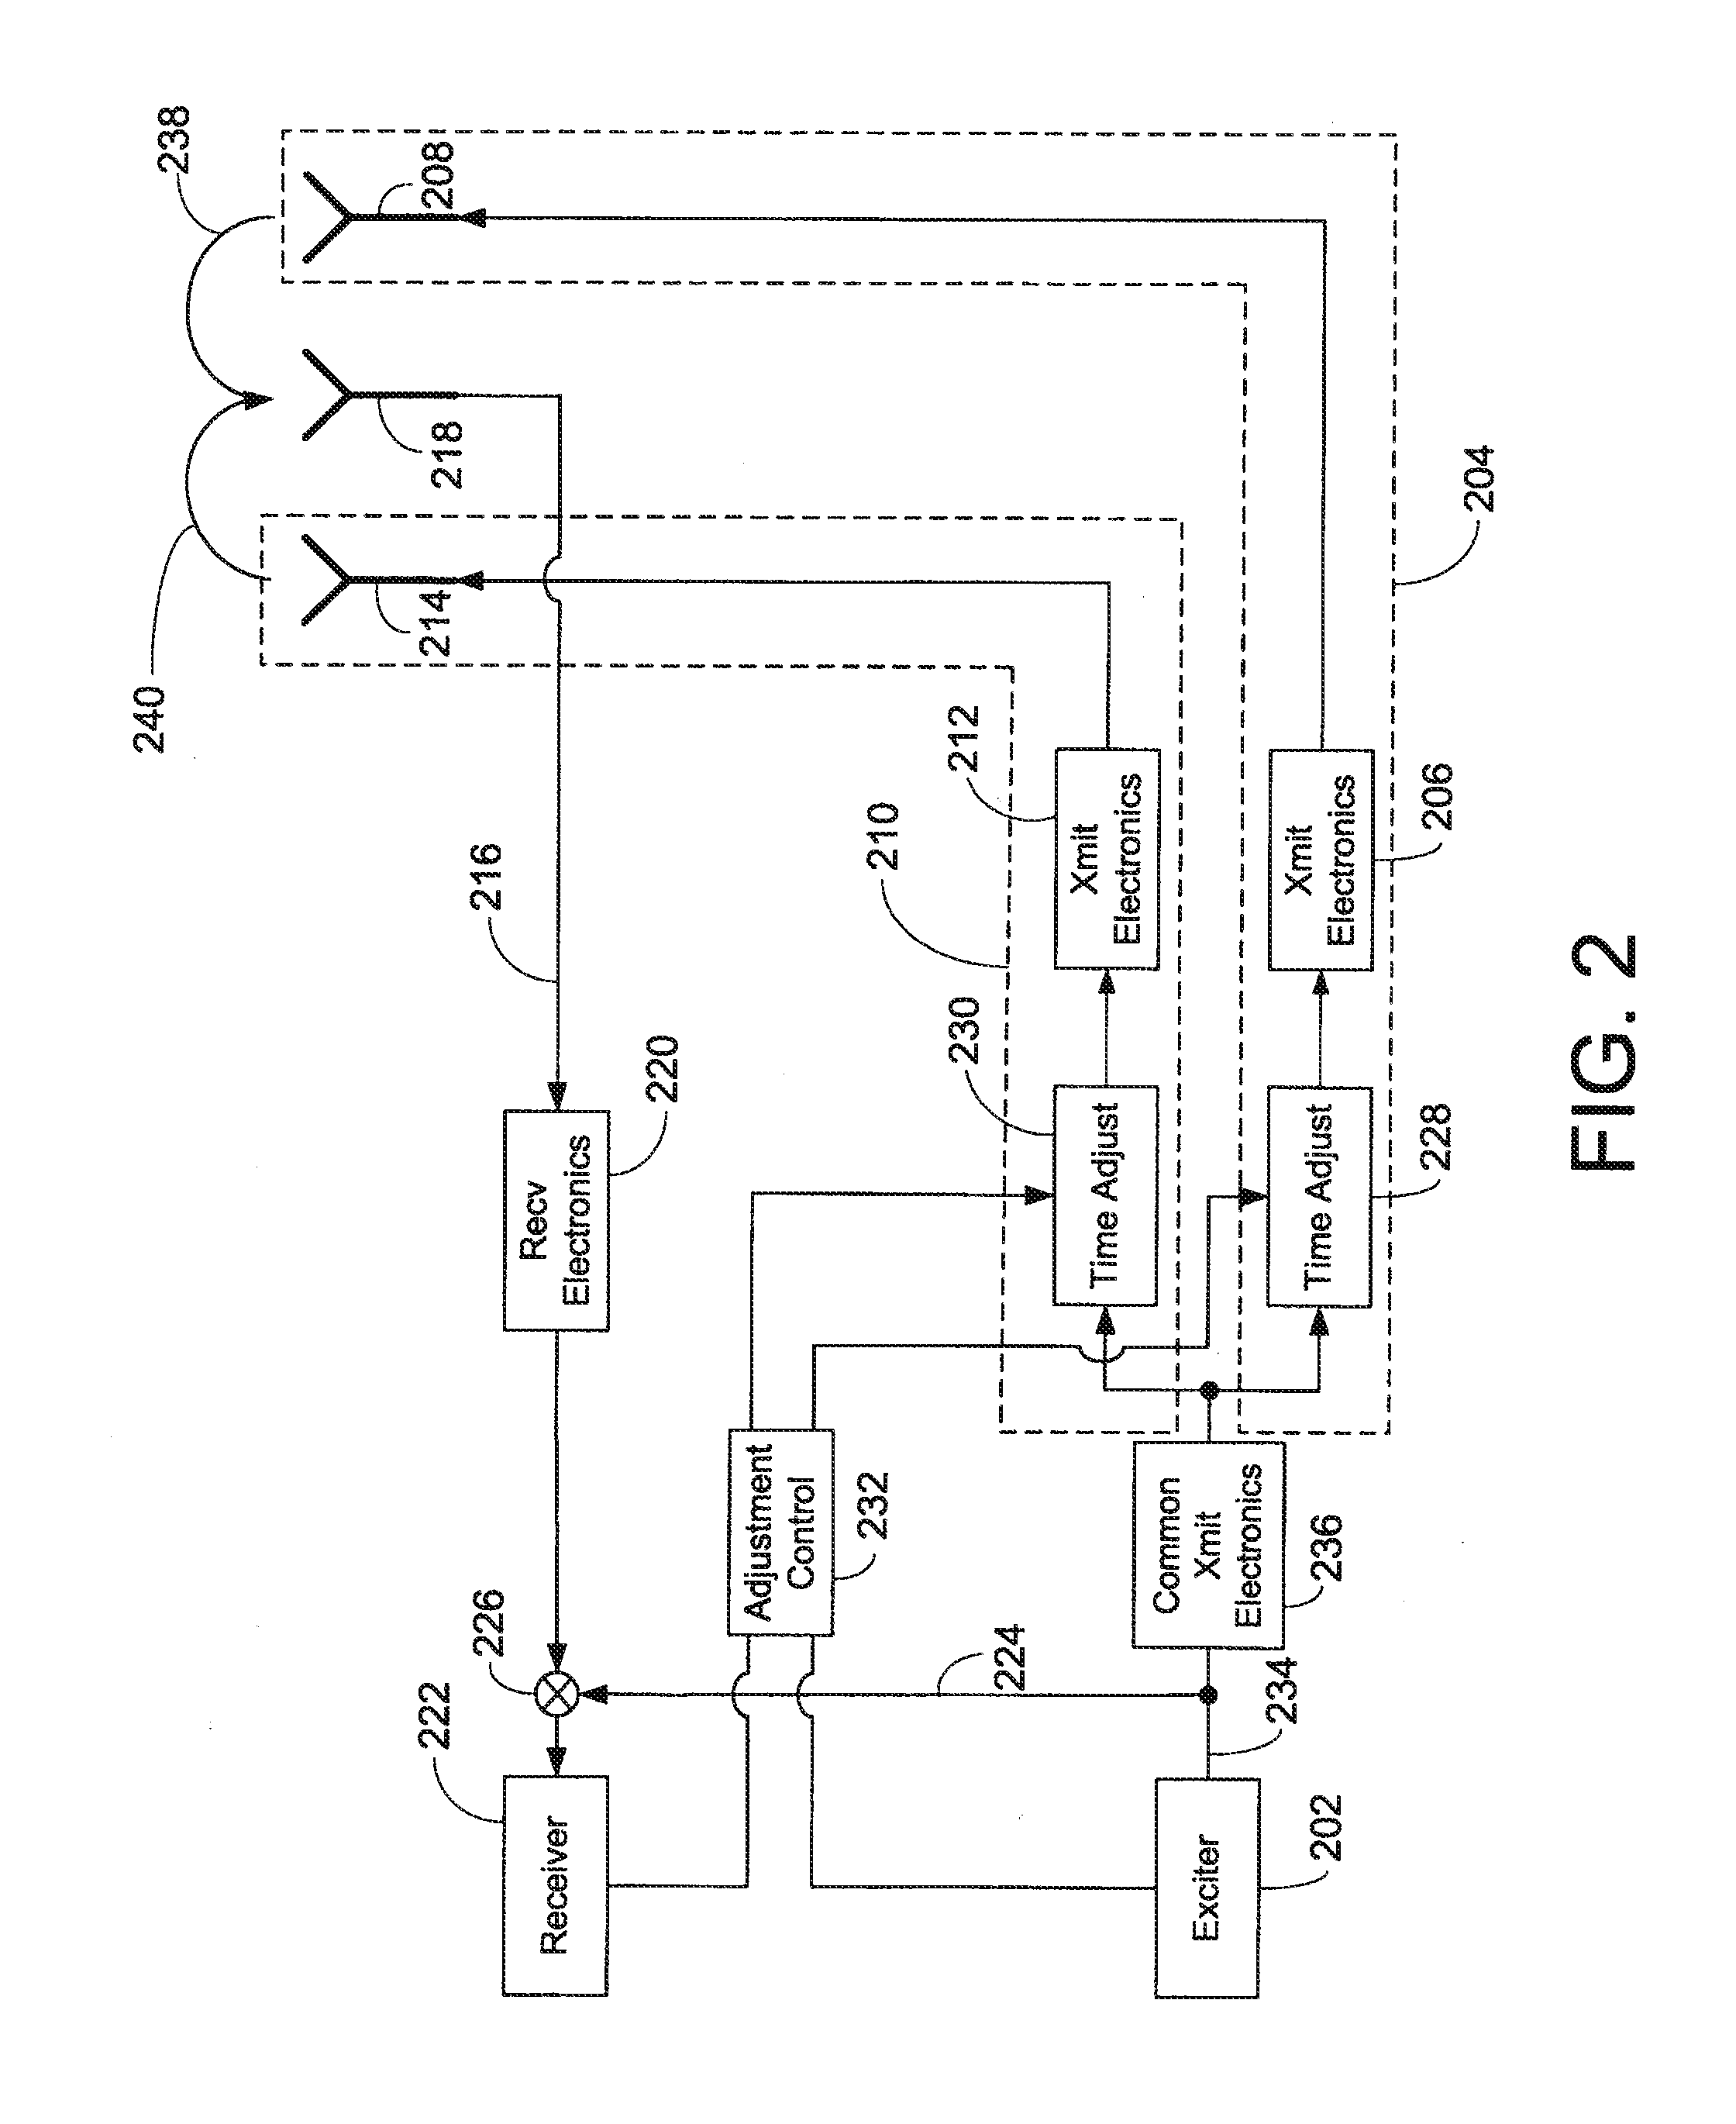 Method and system for propagation time measurement and calibration using mutual coupling in a radio frequency transmit/receive system